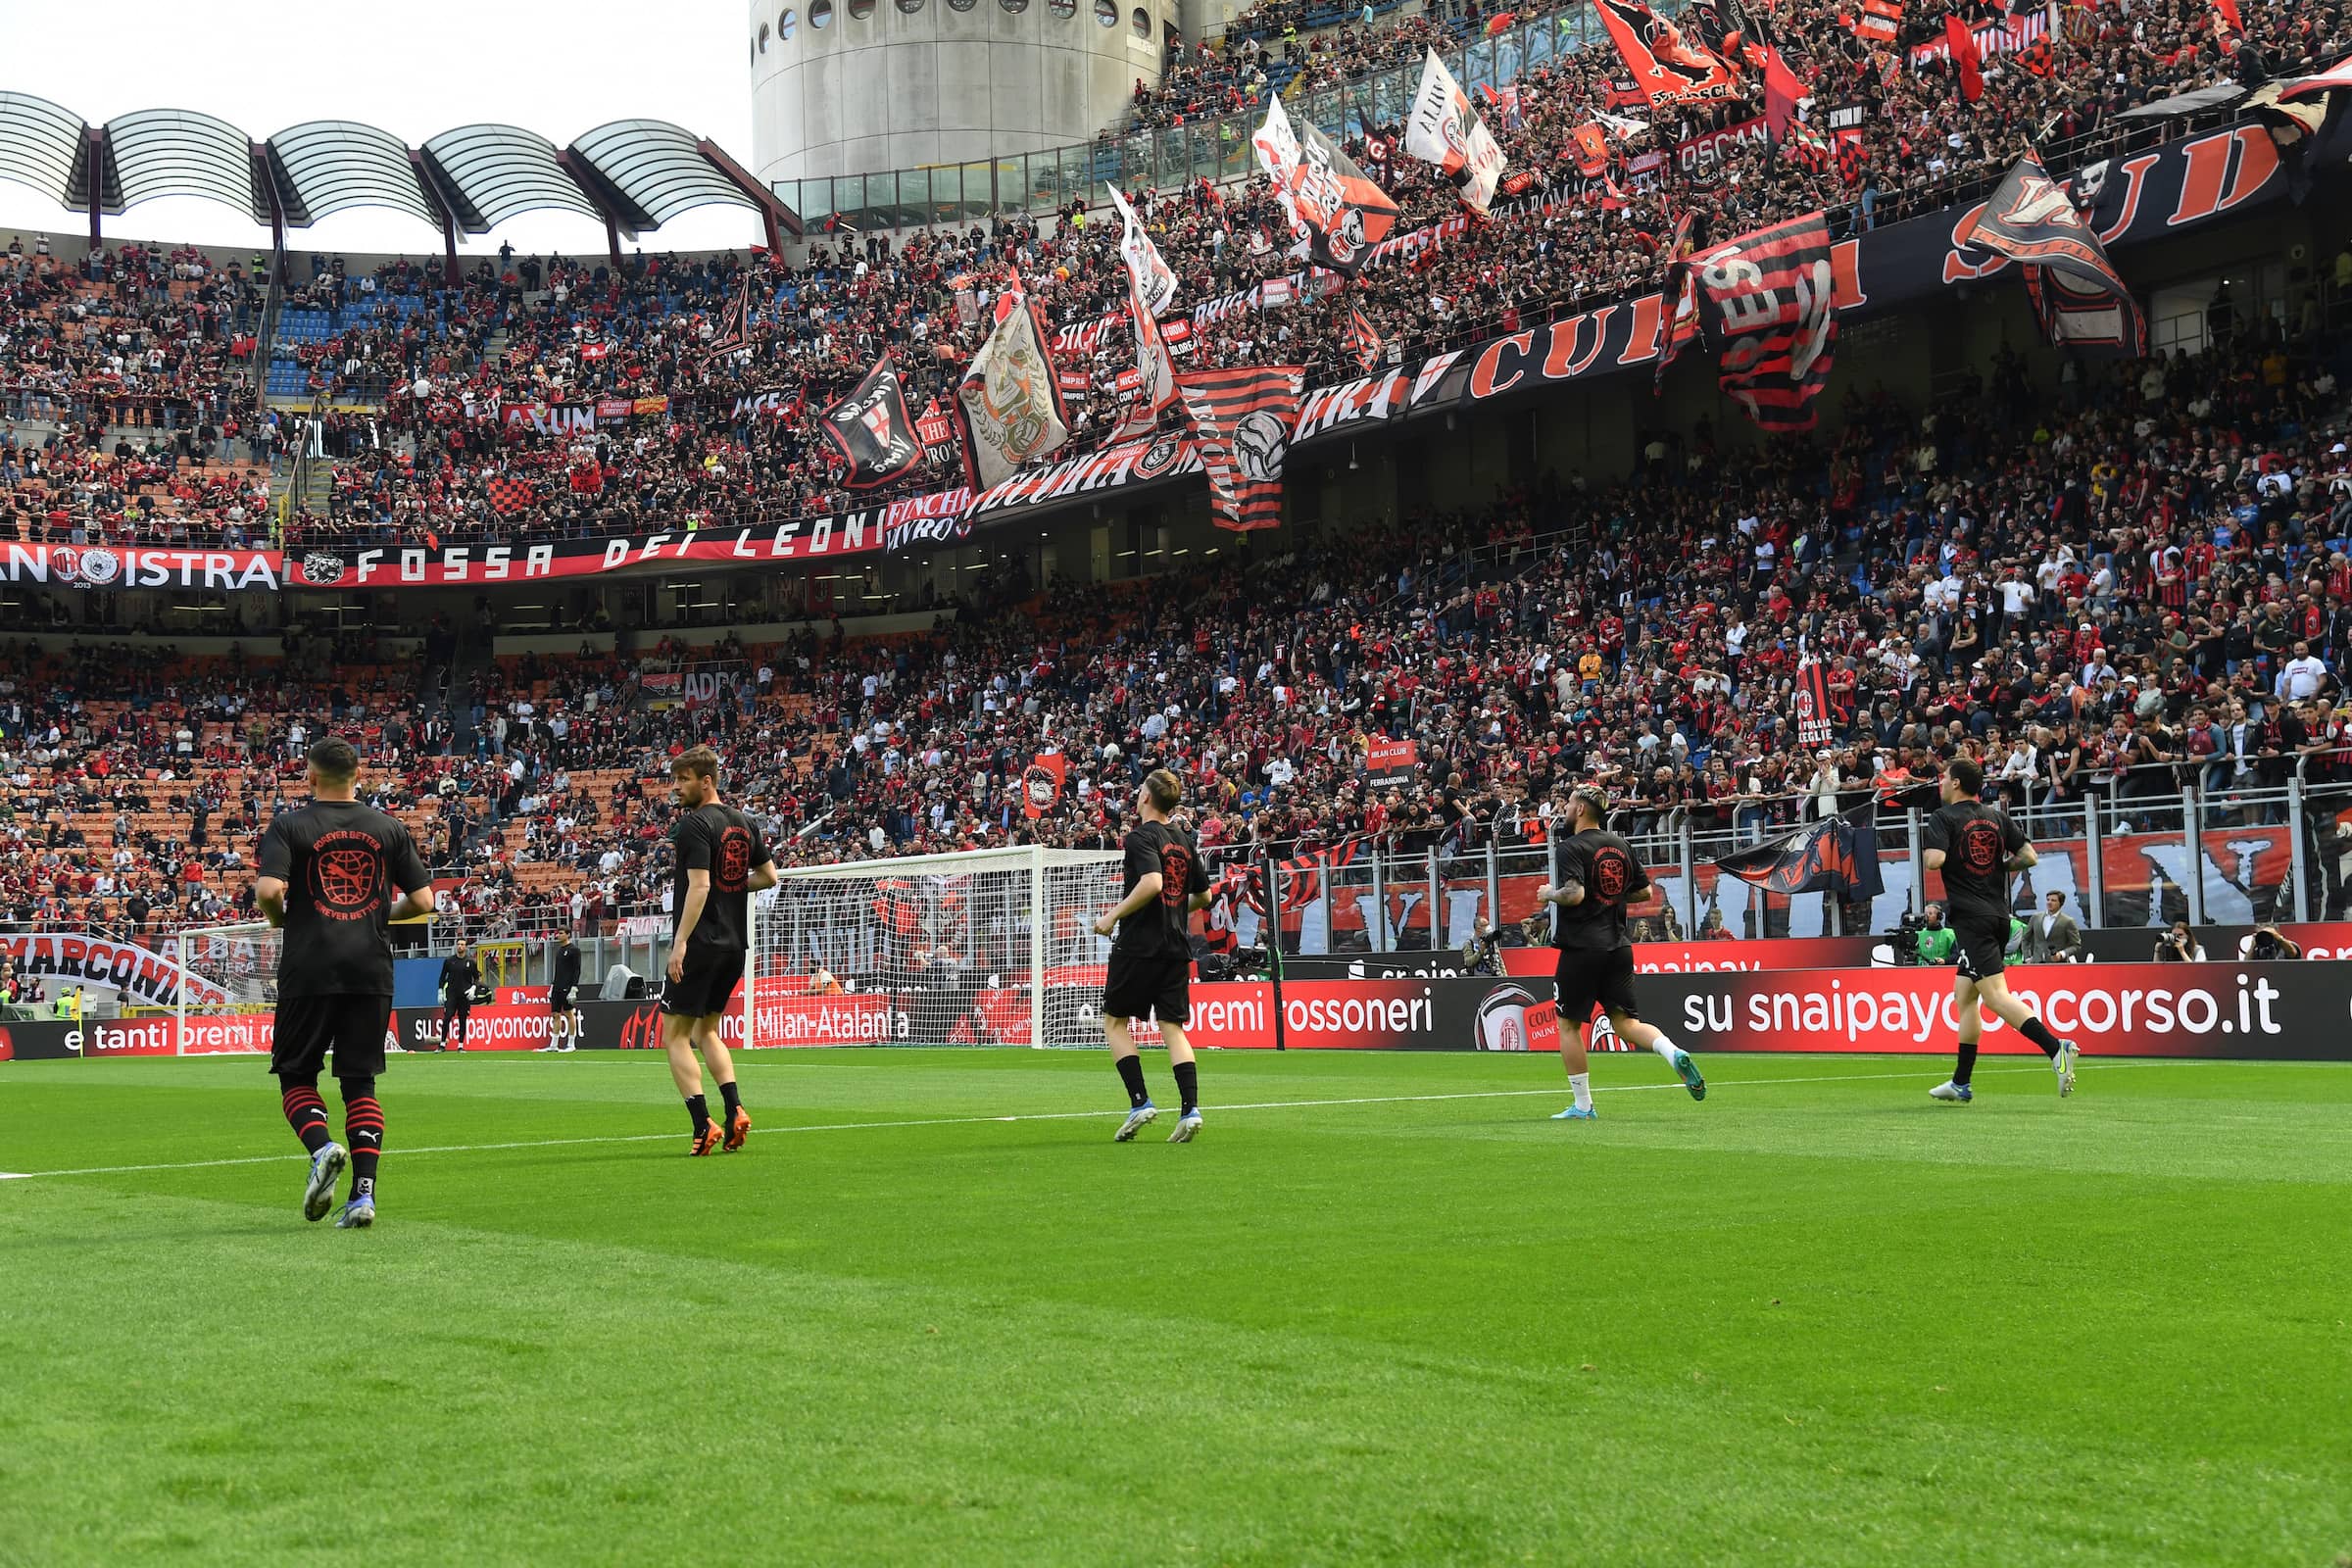 What was so special about ac milan players’ jerseys worn at the weekend